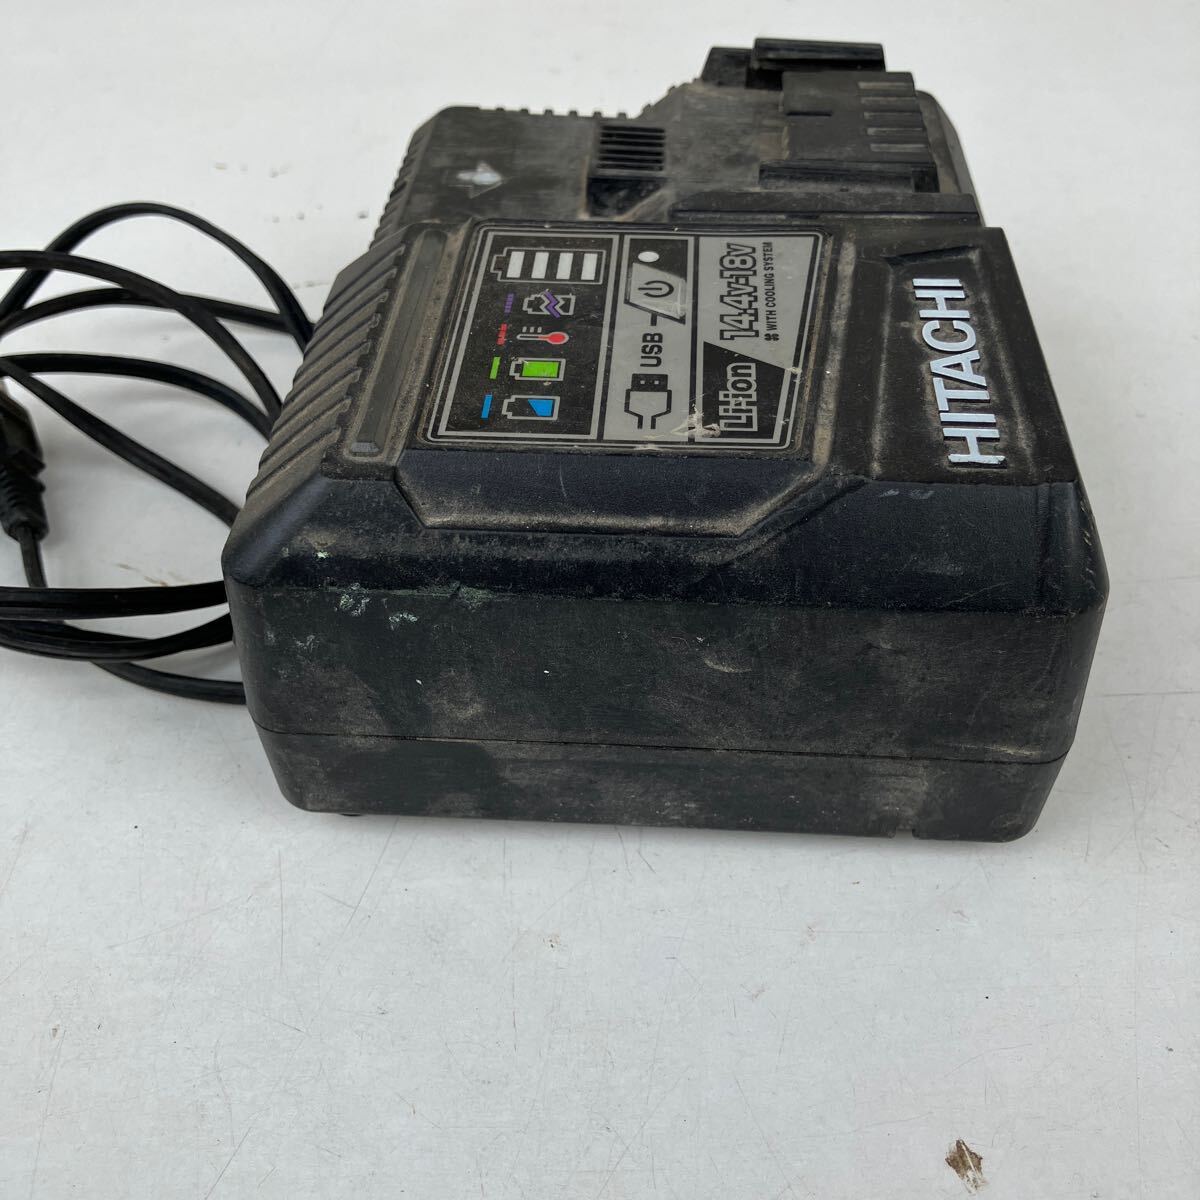 HITACHI fast charger UC18YDL Hitachi fast charger UC18YDL2 14.4-18VUSB correspondence charger Hitachi Koki battery tool supplies sudden speed Hitachi product 